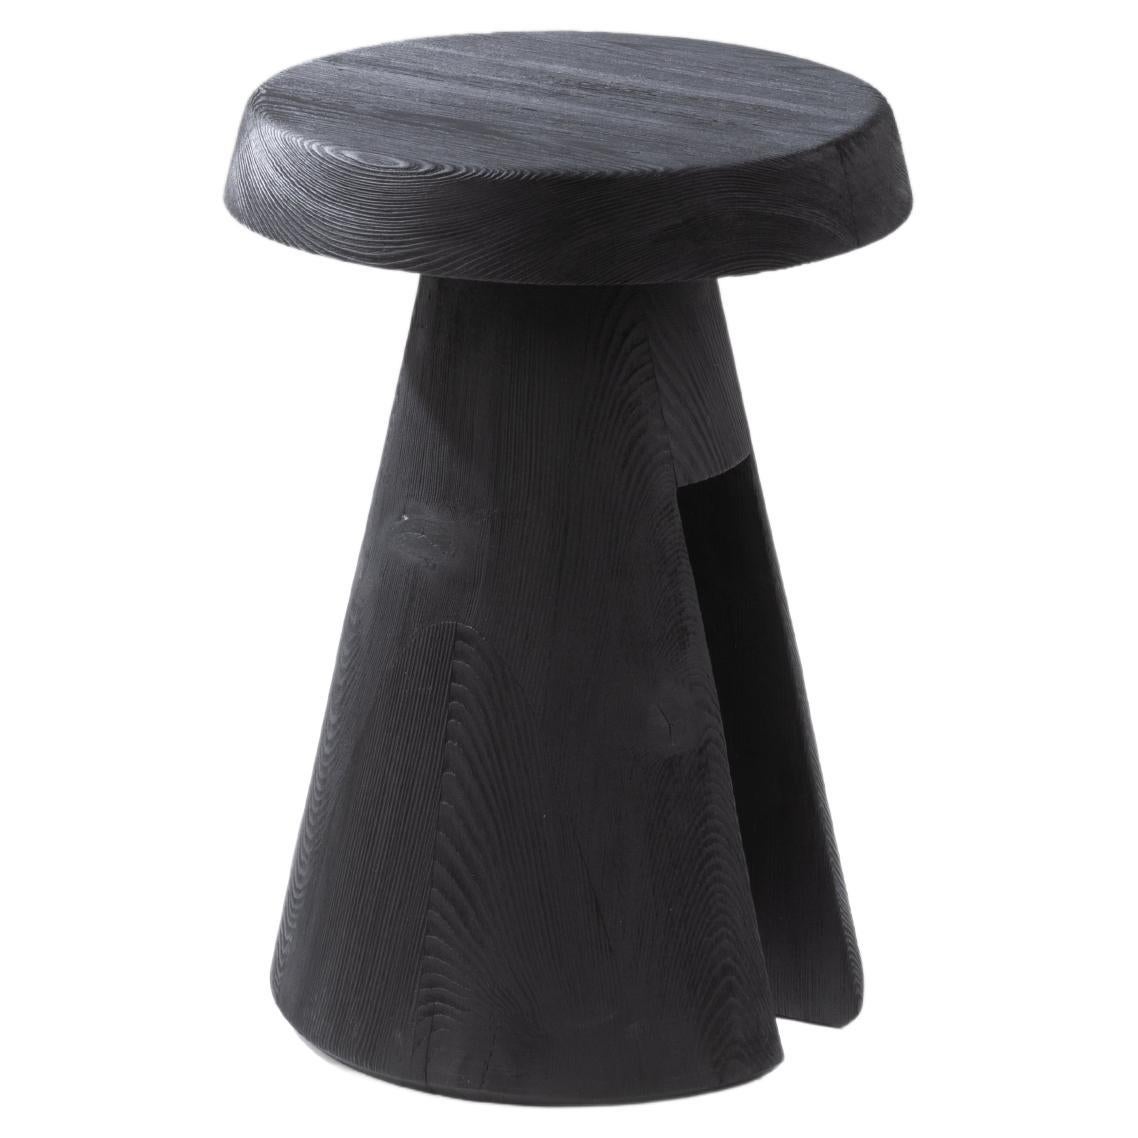 Data stool in solid Oregon by Atelier Thomas Serruys
Dimensions: H 44 x D 32cm 
Materials: A hand turned stool in solid oregon. 

A hand turned stool in solid oregon. Trapezoid shaped base with rectangular void, topped by a soft edged circular